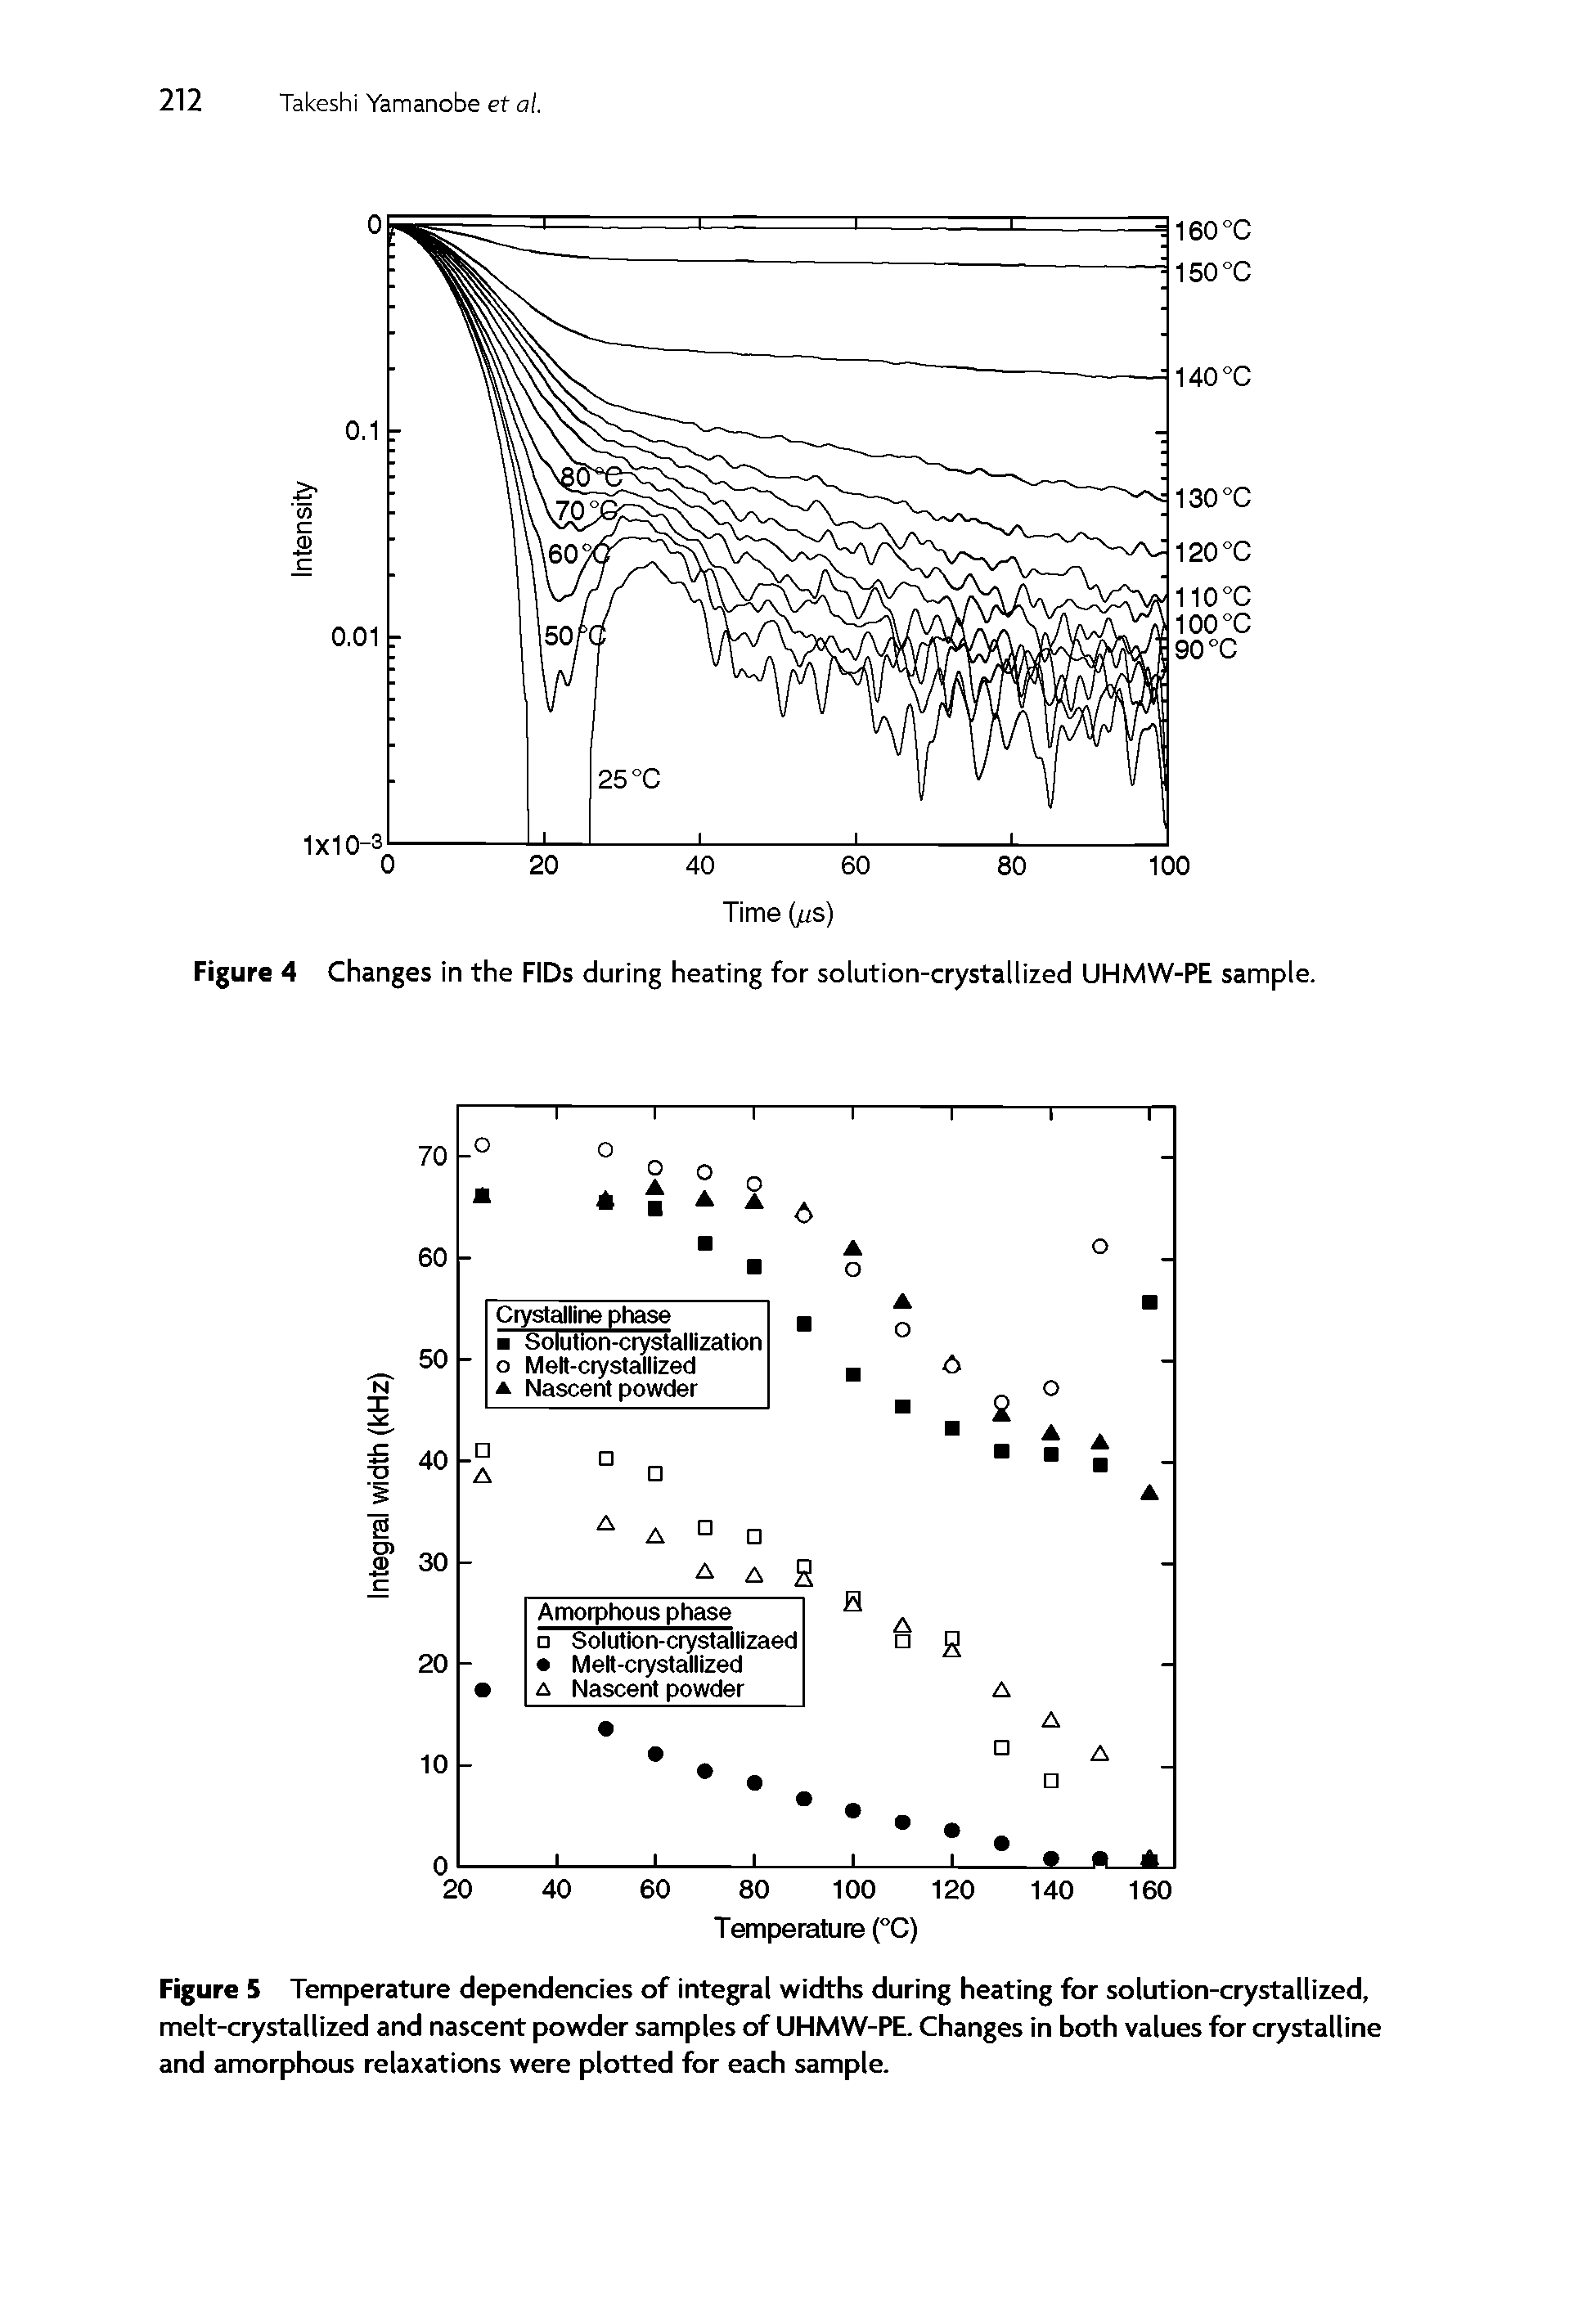 Figure 5 Temperature dependencies of integral widths during heating for solution-crystallized, melt-crystallized and nascent powder samples of UHMW-PE. Changes in both values for crystalline and amorphous relaxations were plotted for each sample.